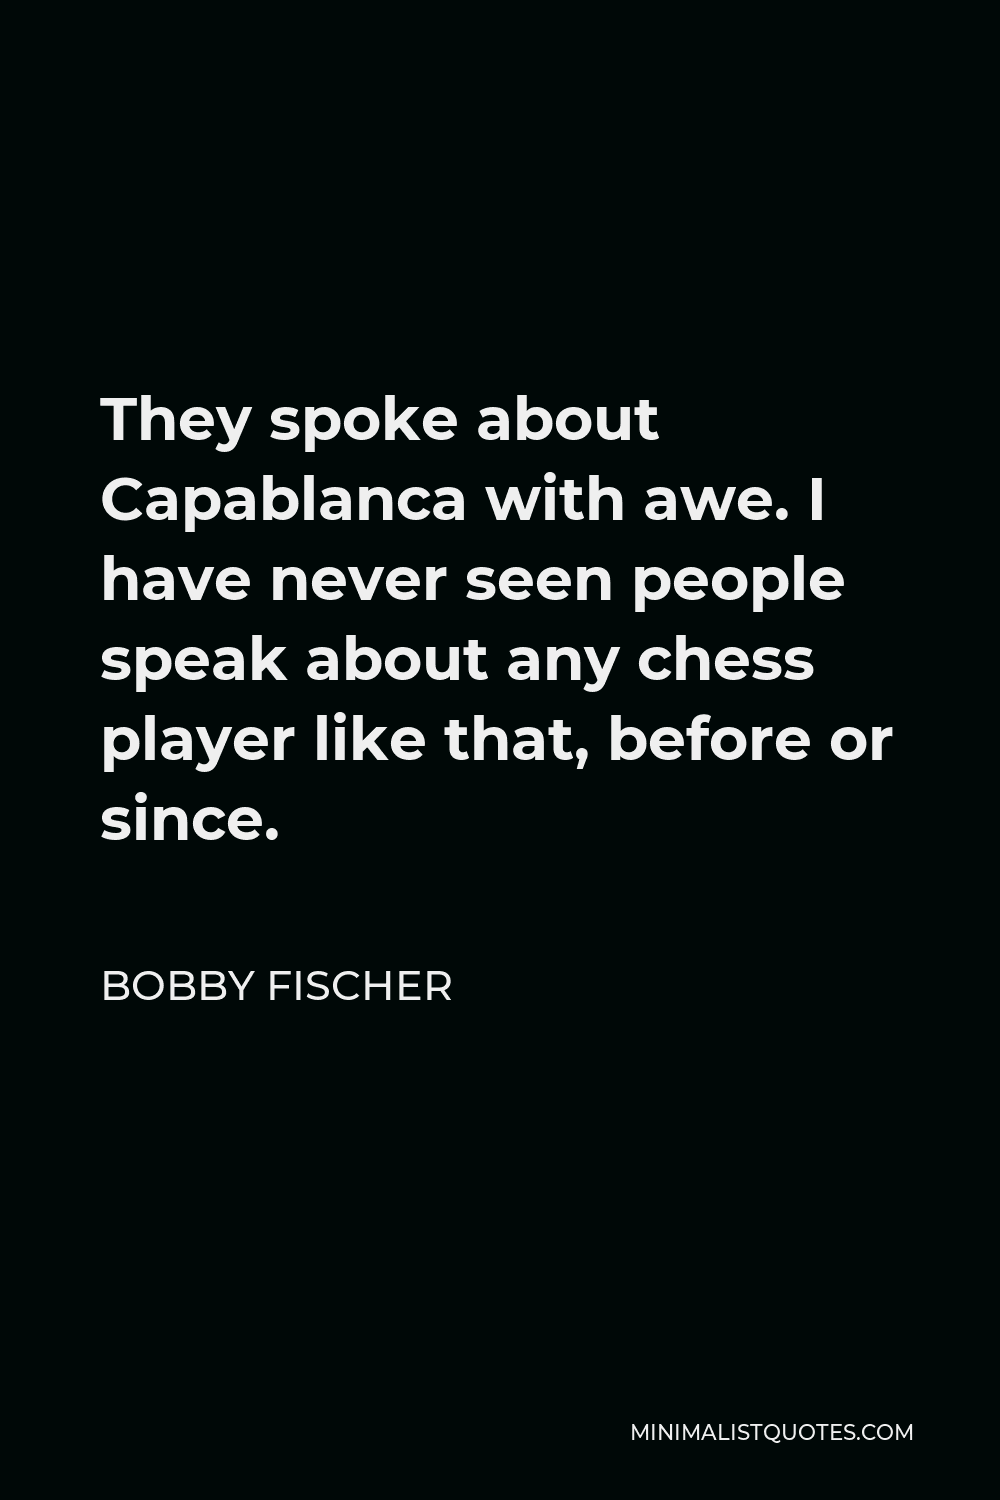 Bobby Fischer Quote - They spoke about Capablanca with awe. I have never seen people speak about any chess player like that, before or since.